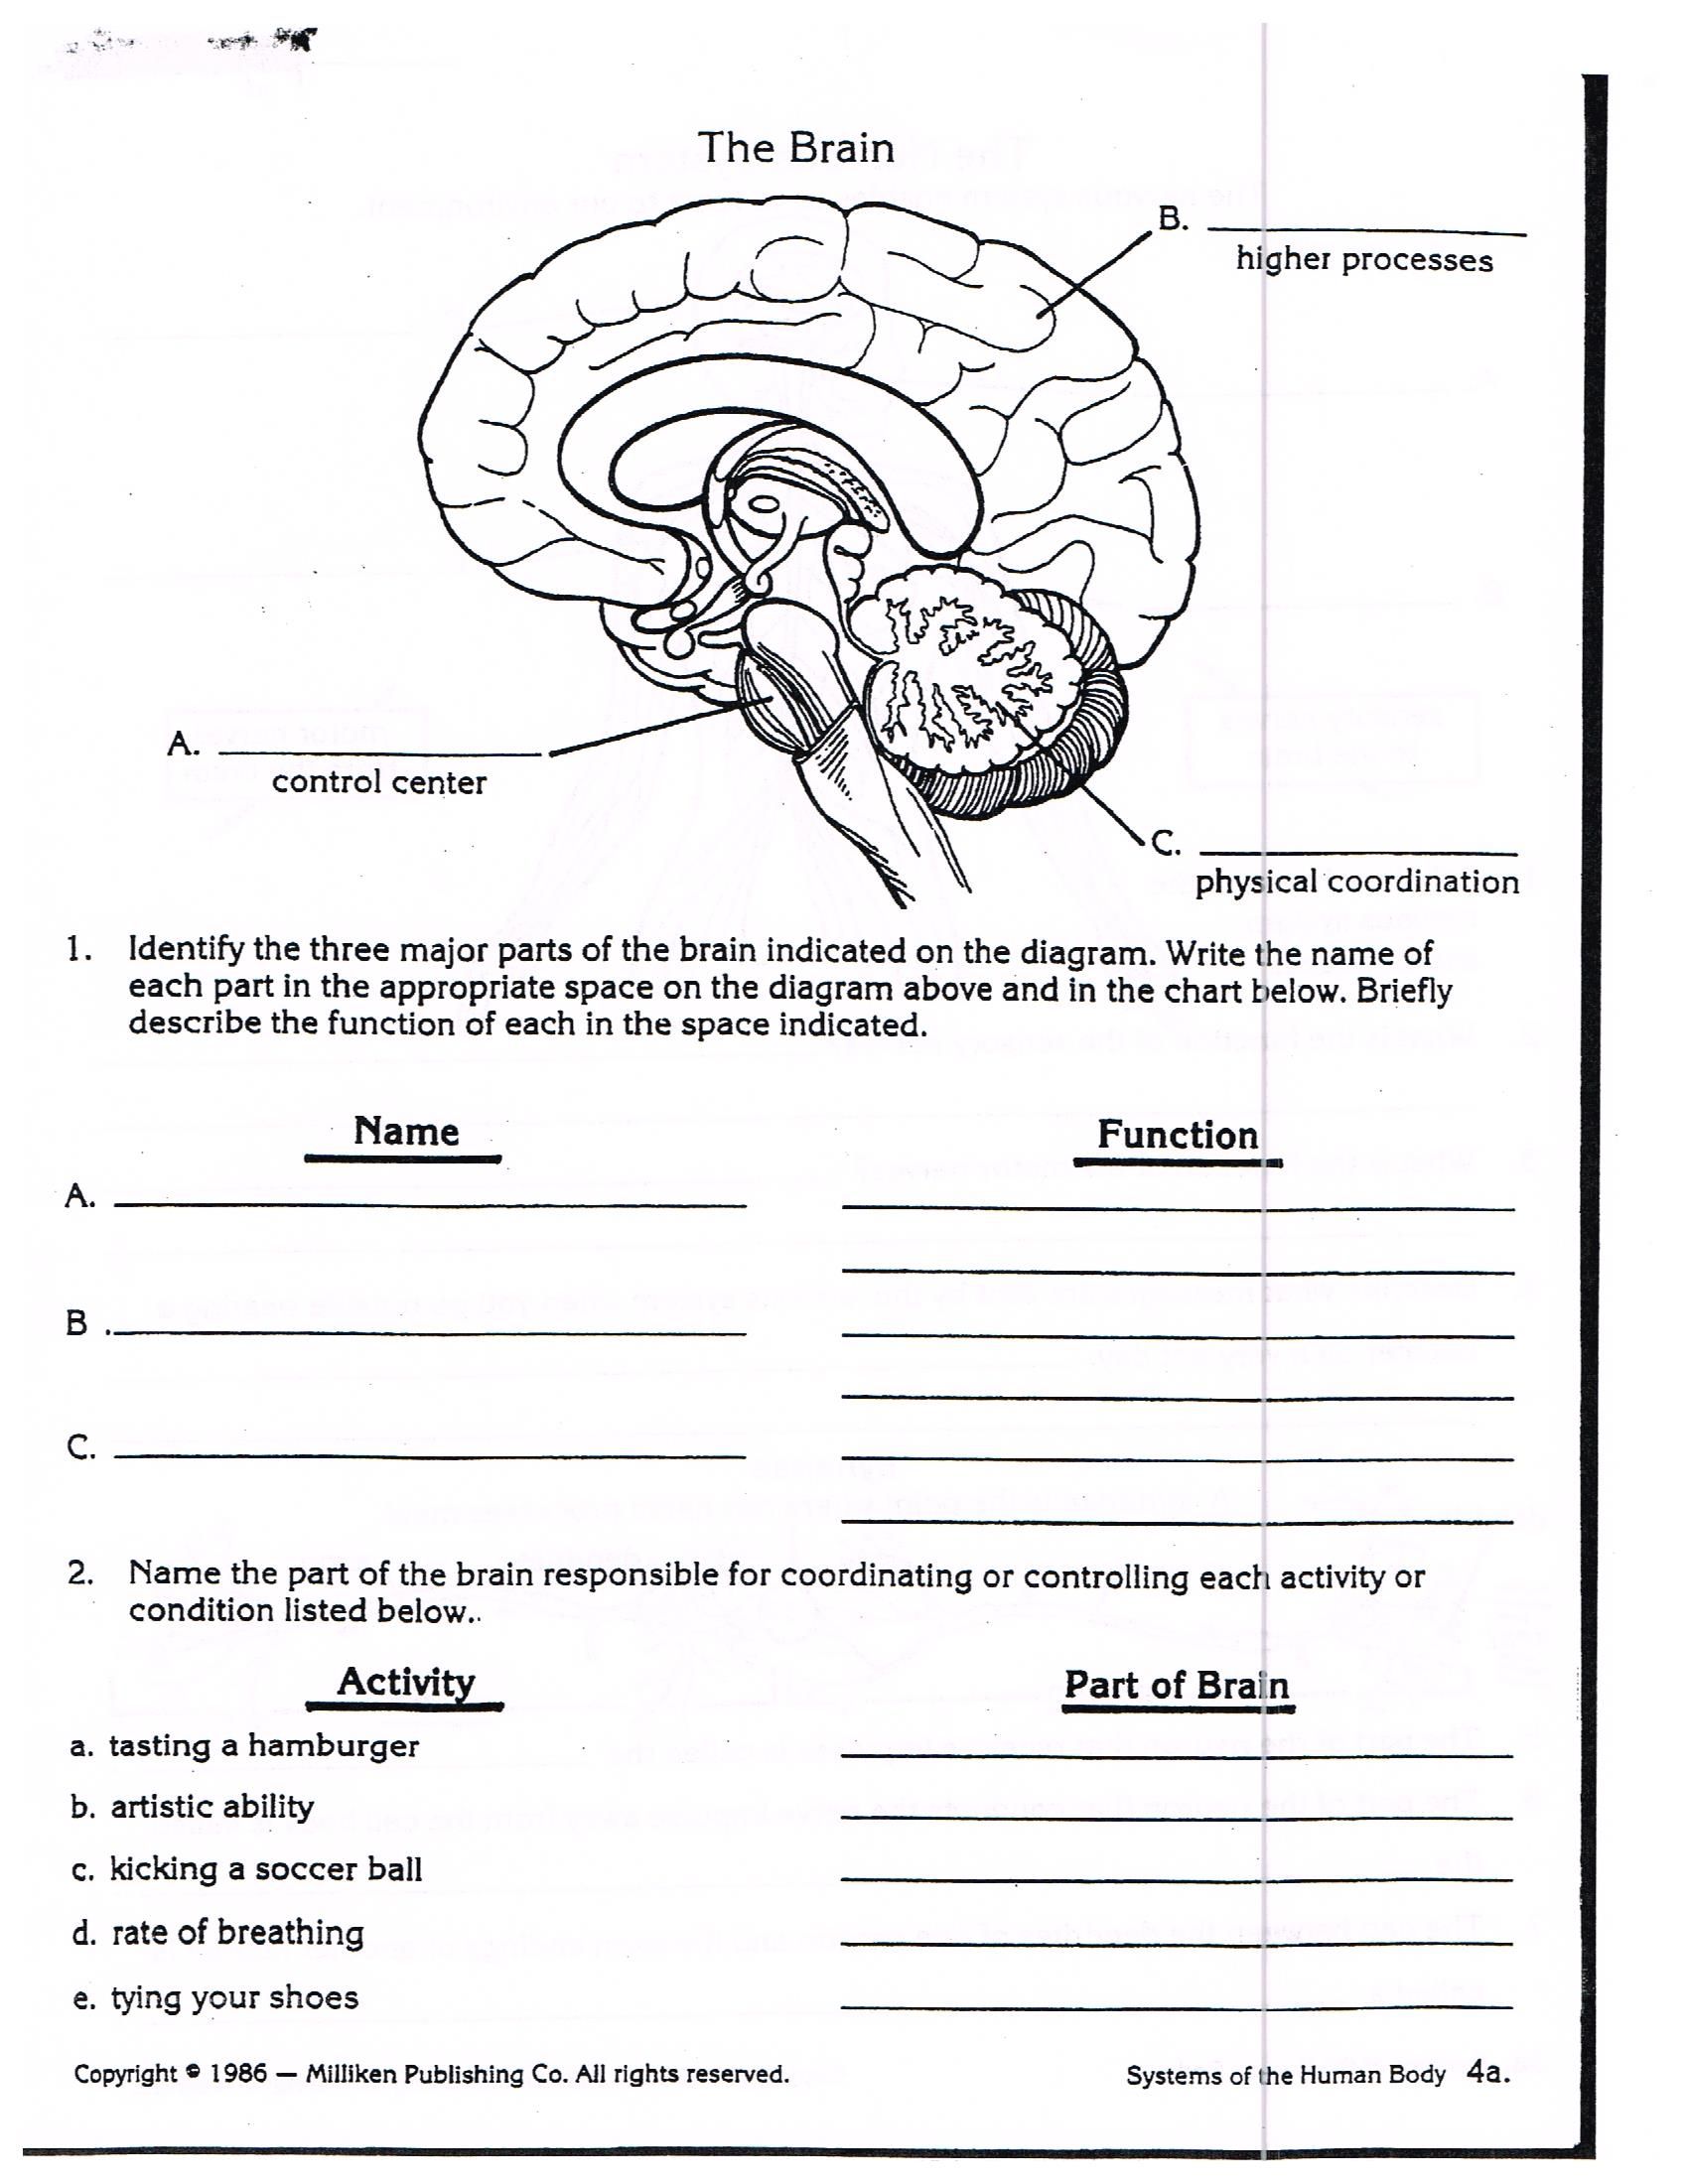 parts of the brain worksheet answers